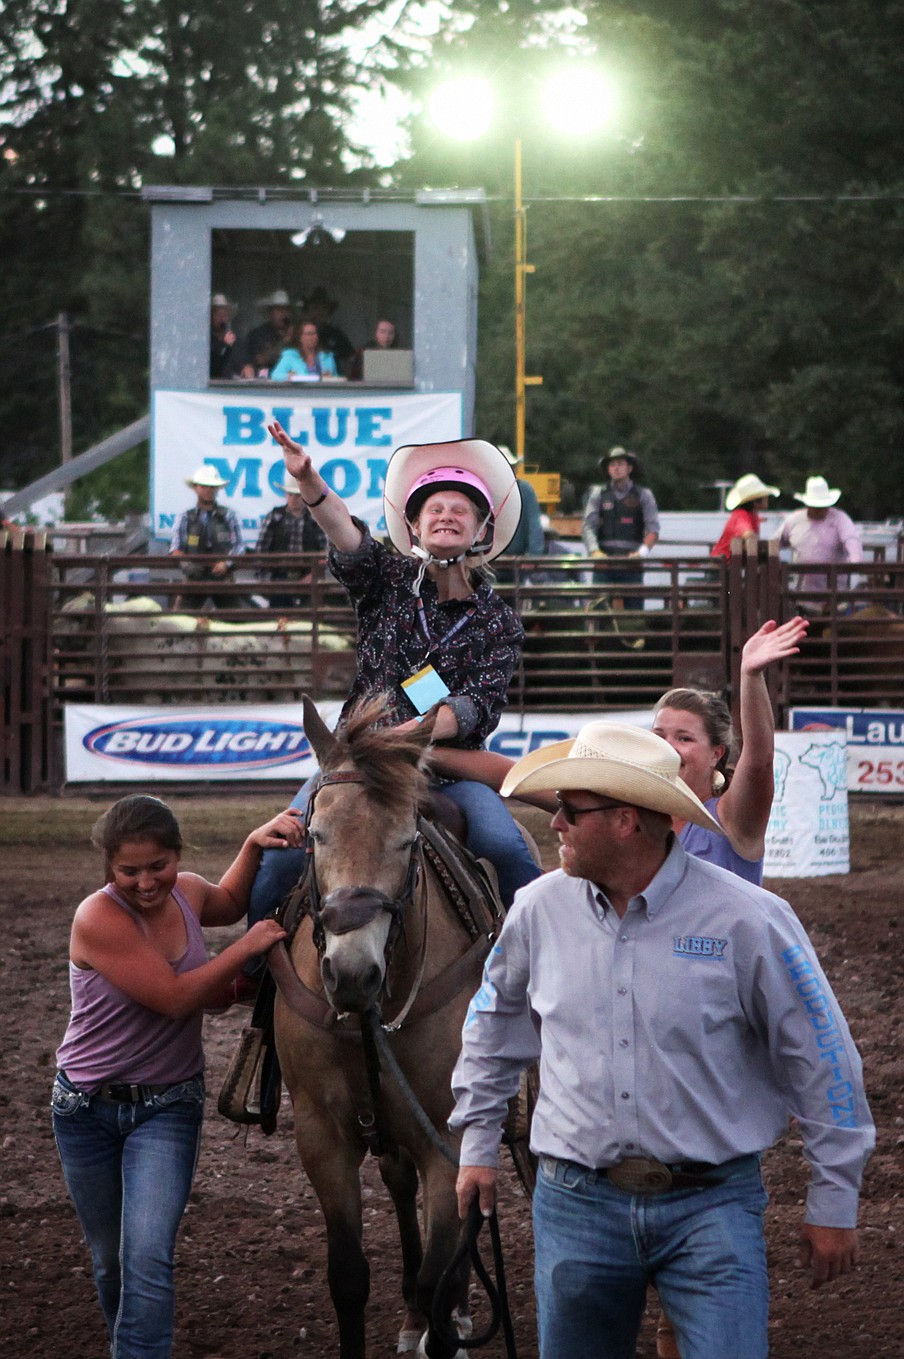 Taylon Halden, of Columbia Falls, gives a wave to the crowd at the Blue Moon Rodeo on July 20. Holden, who lives with cerebral palsy, participated in barrel racing for the first time that night.